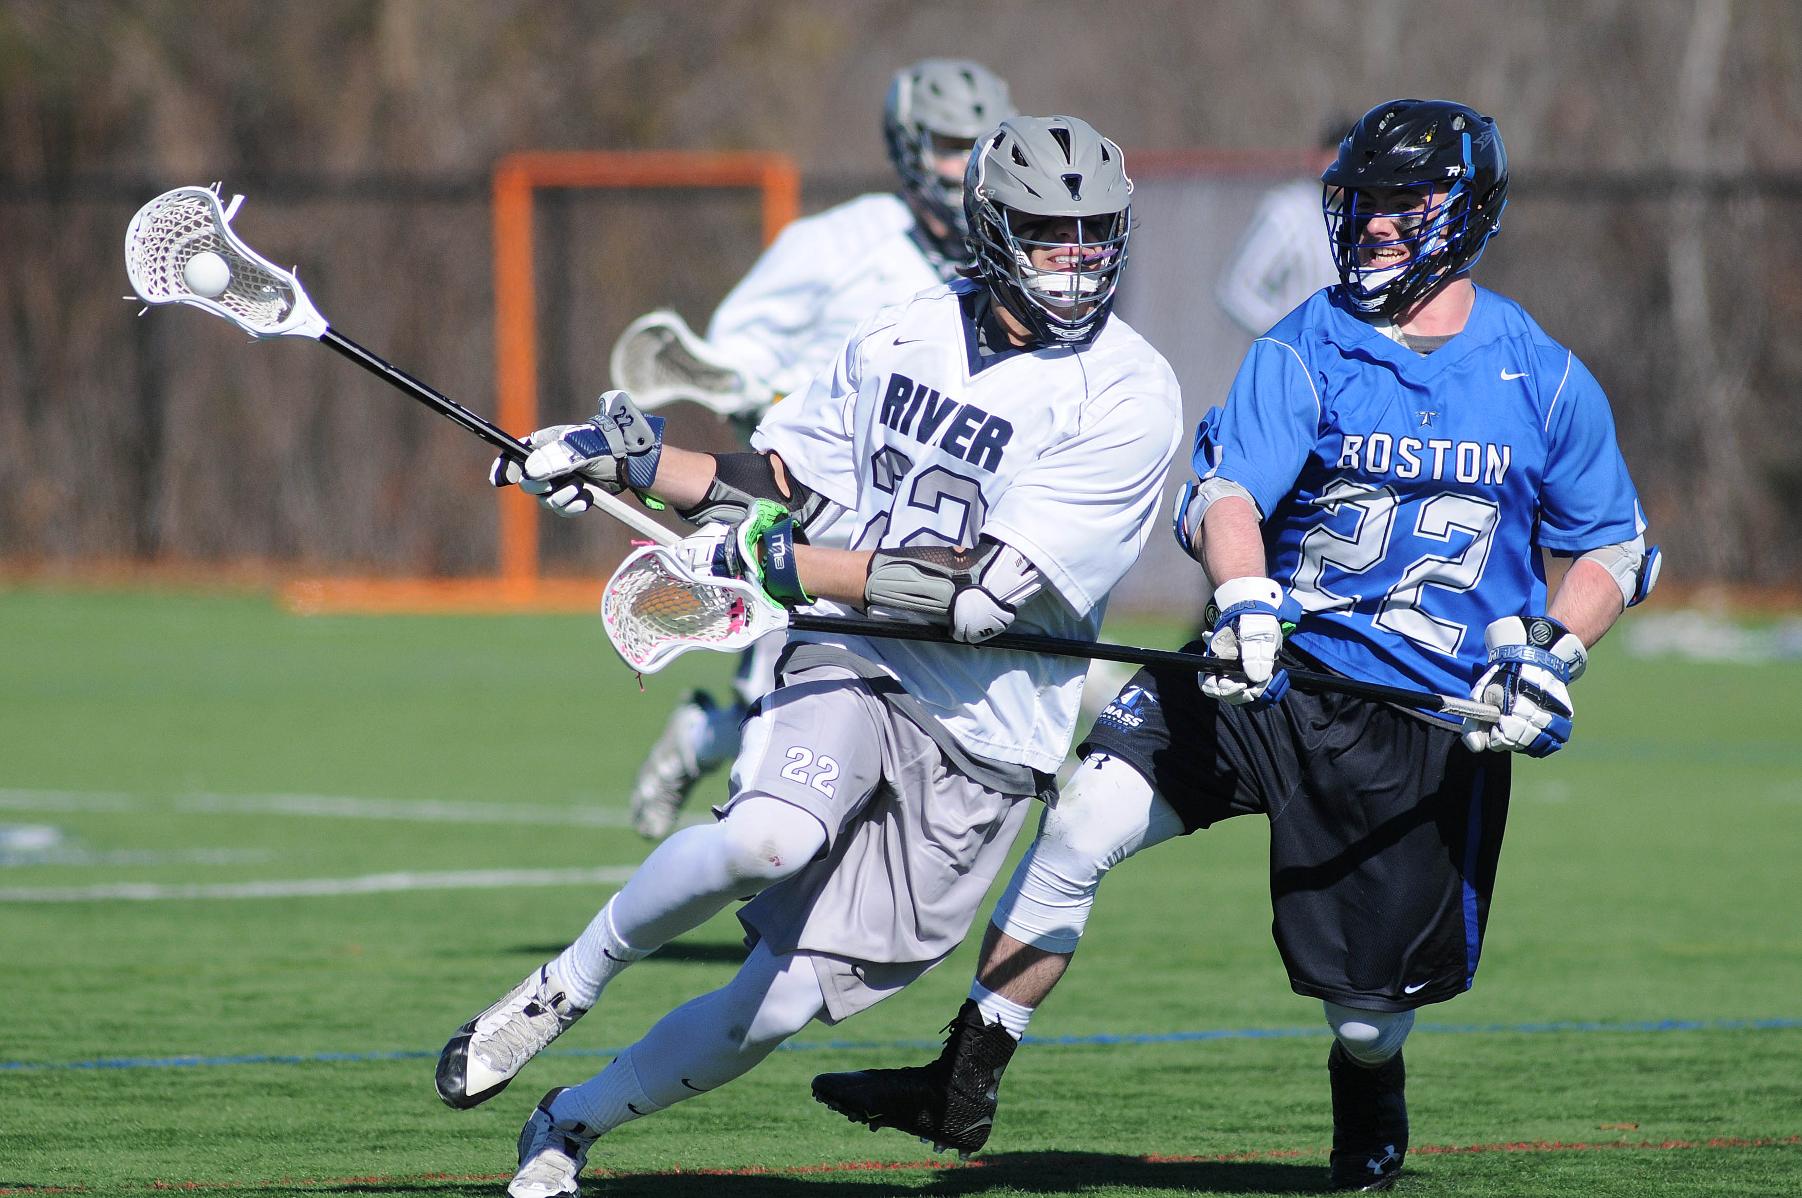 Men's Lacrosse victorious in overtime at Nichols, 8-7